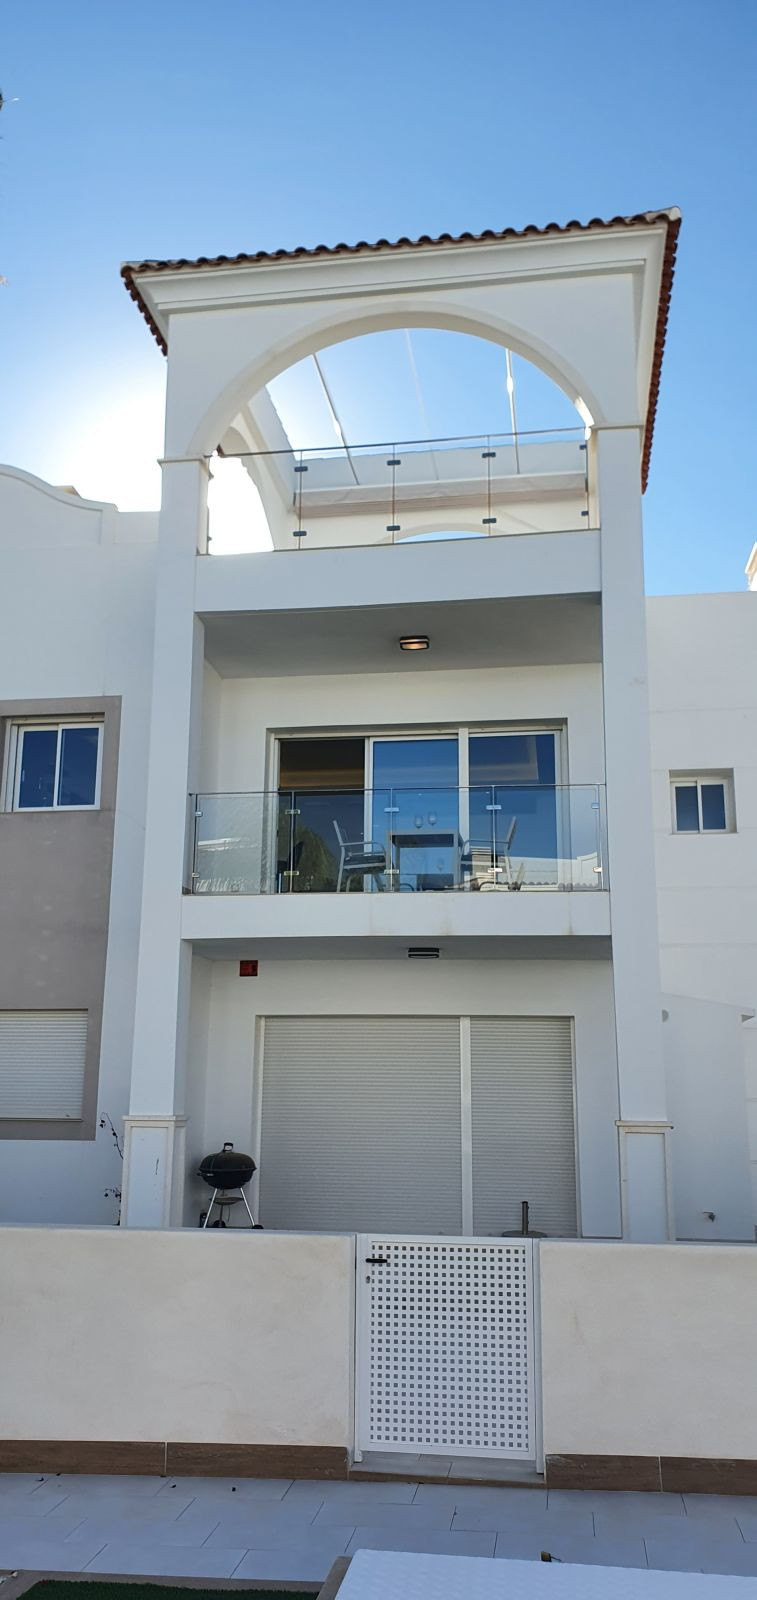 a beautiful duplex apartment with a very nice roof terrace.
This is located in beautiful Torrevieja., Spain